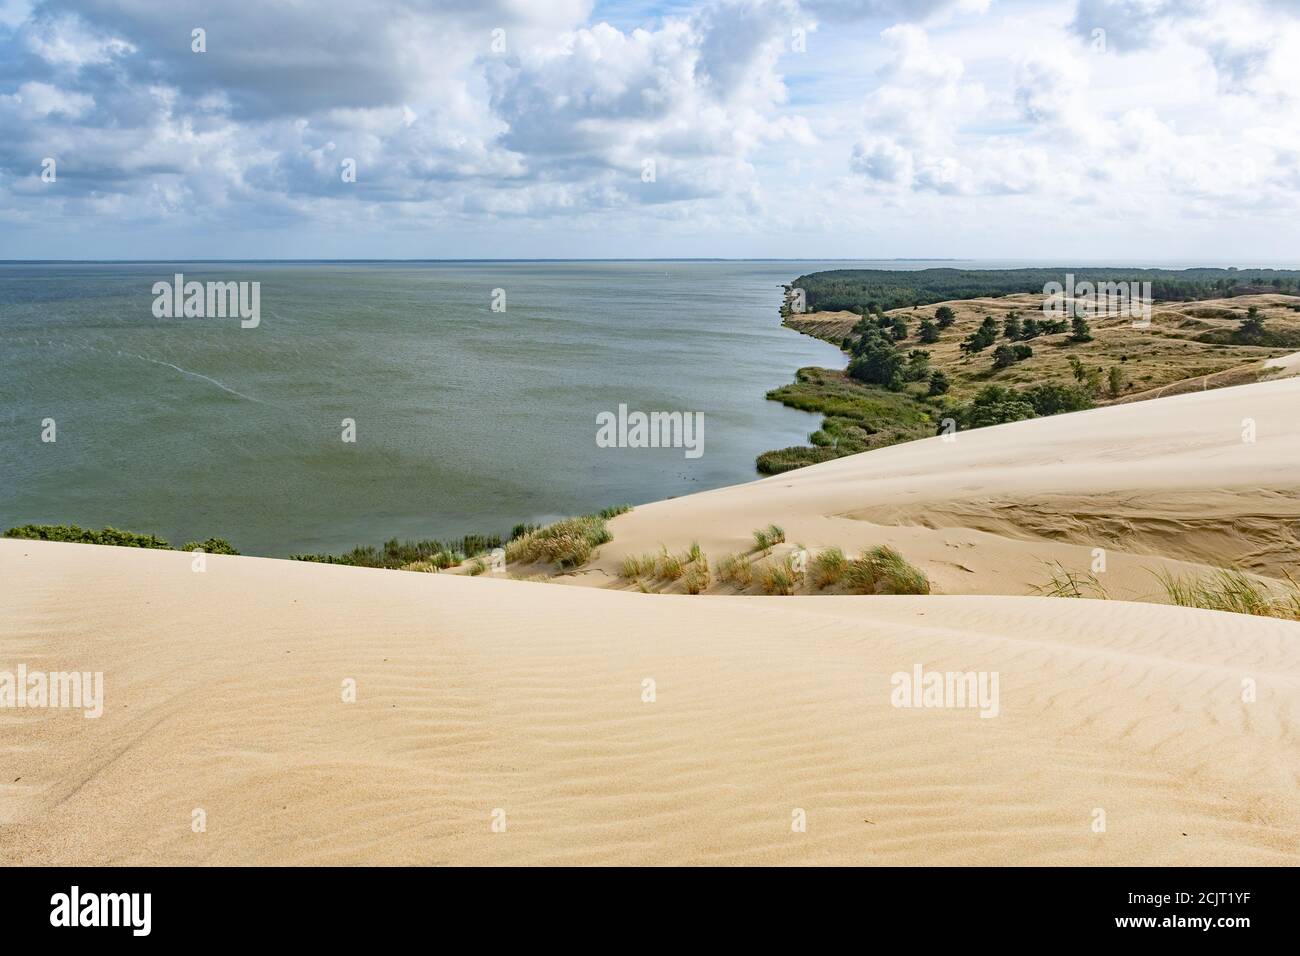 Nagliai Nature Reserve in Neringa, Lithuania. Dead dunes, sand hills built by strong winds, with ravines and erosion. Any human activity is prohibited Stock Photo